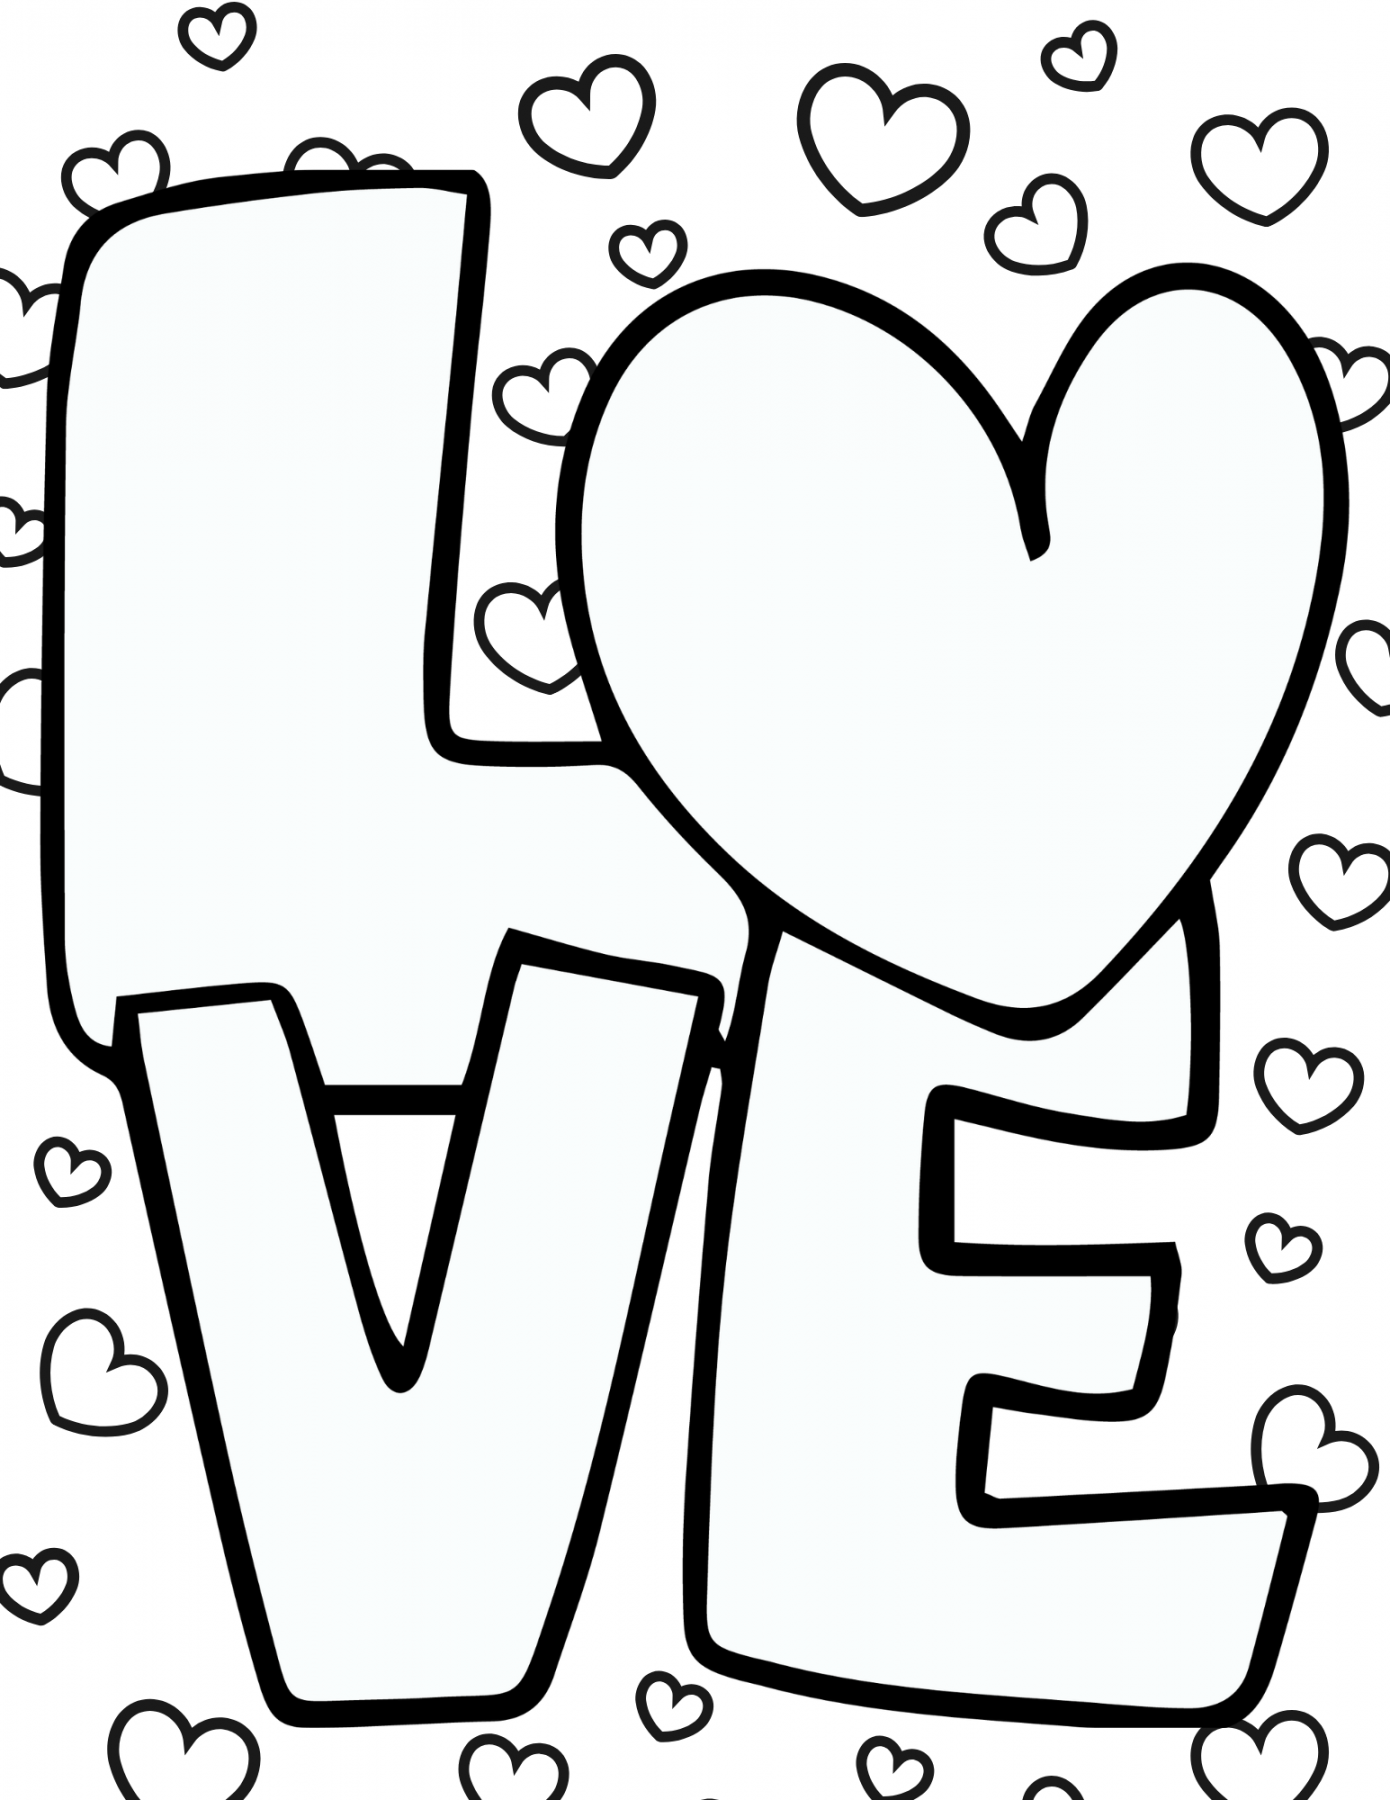 Free Printable Coloring Pages - Printable - Free Printable Love Coloring Pages for Kids and Adults